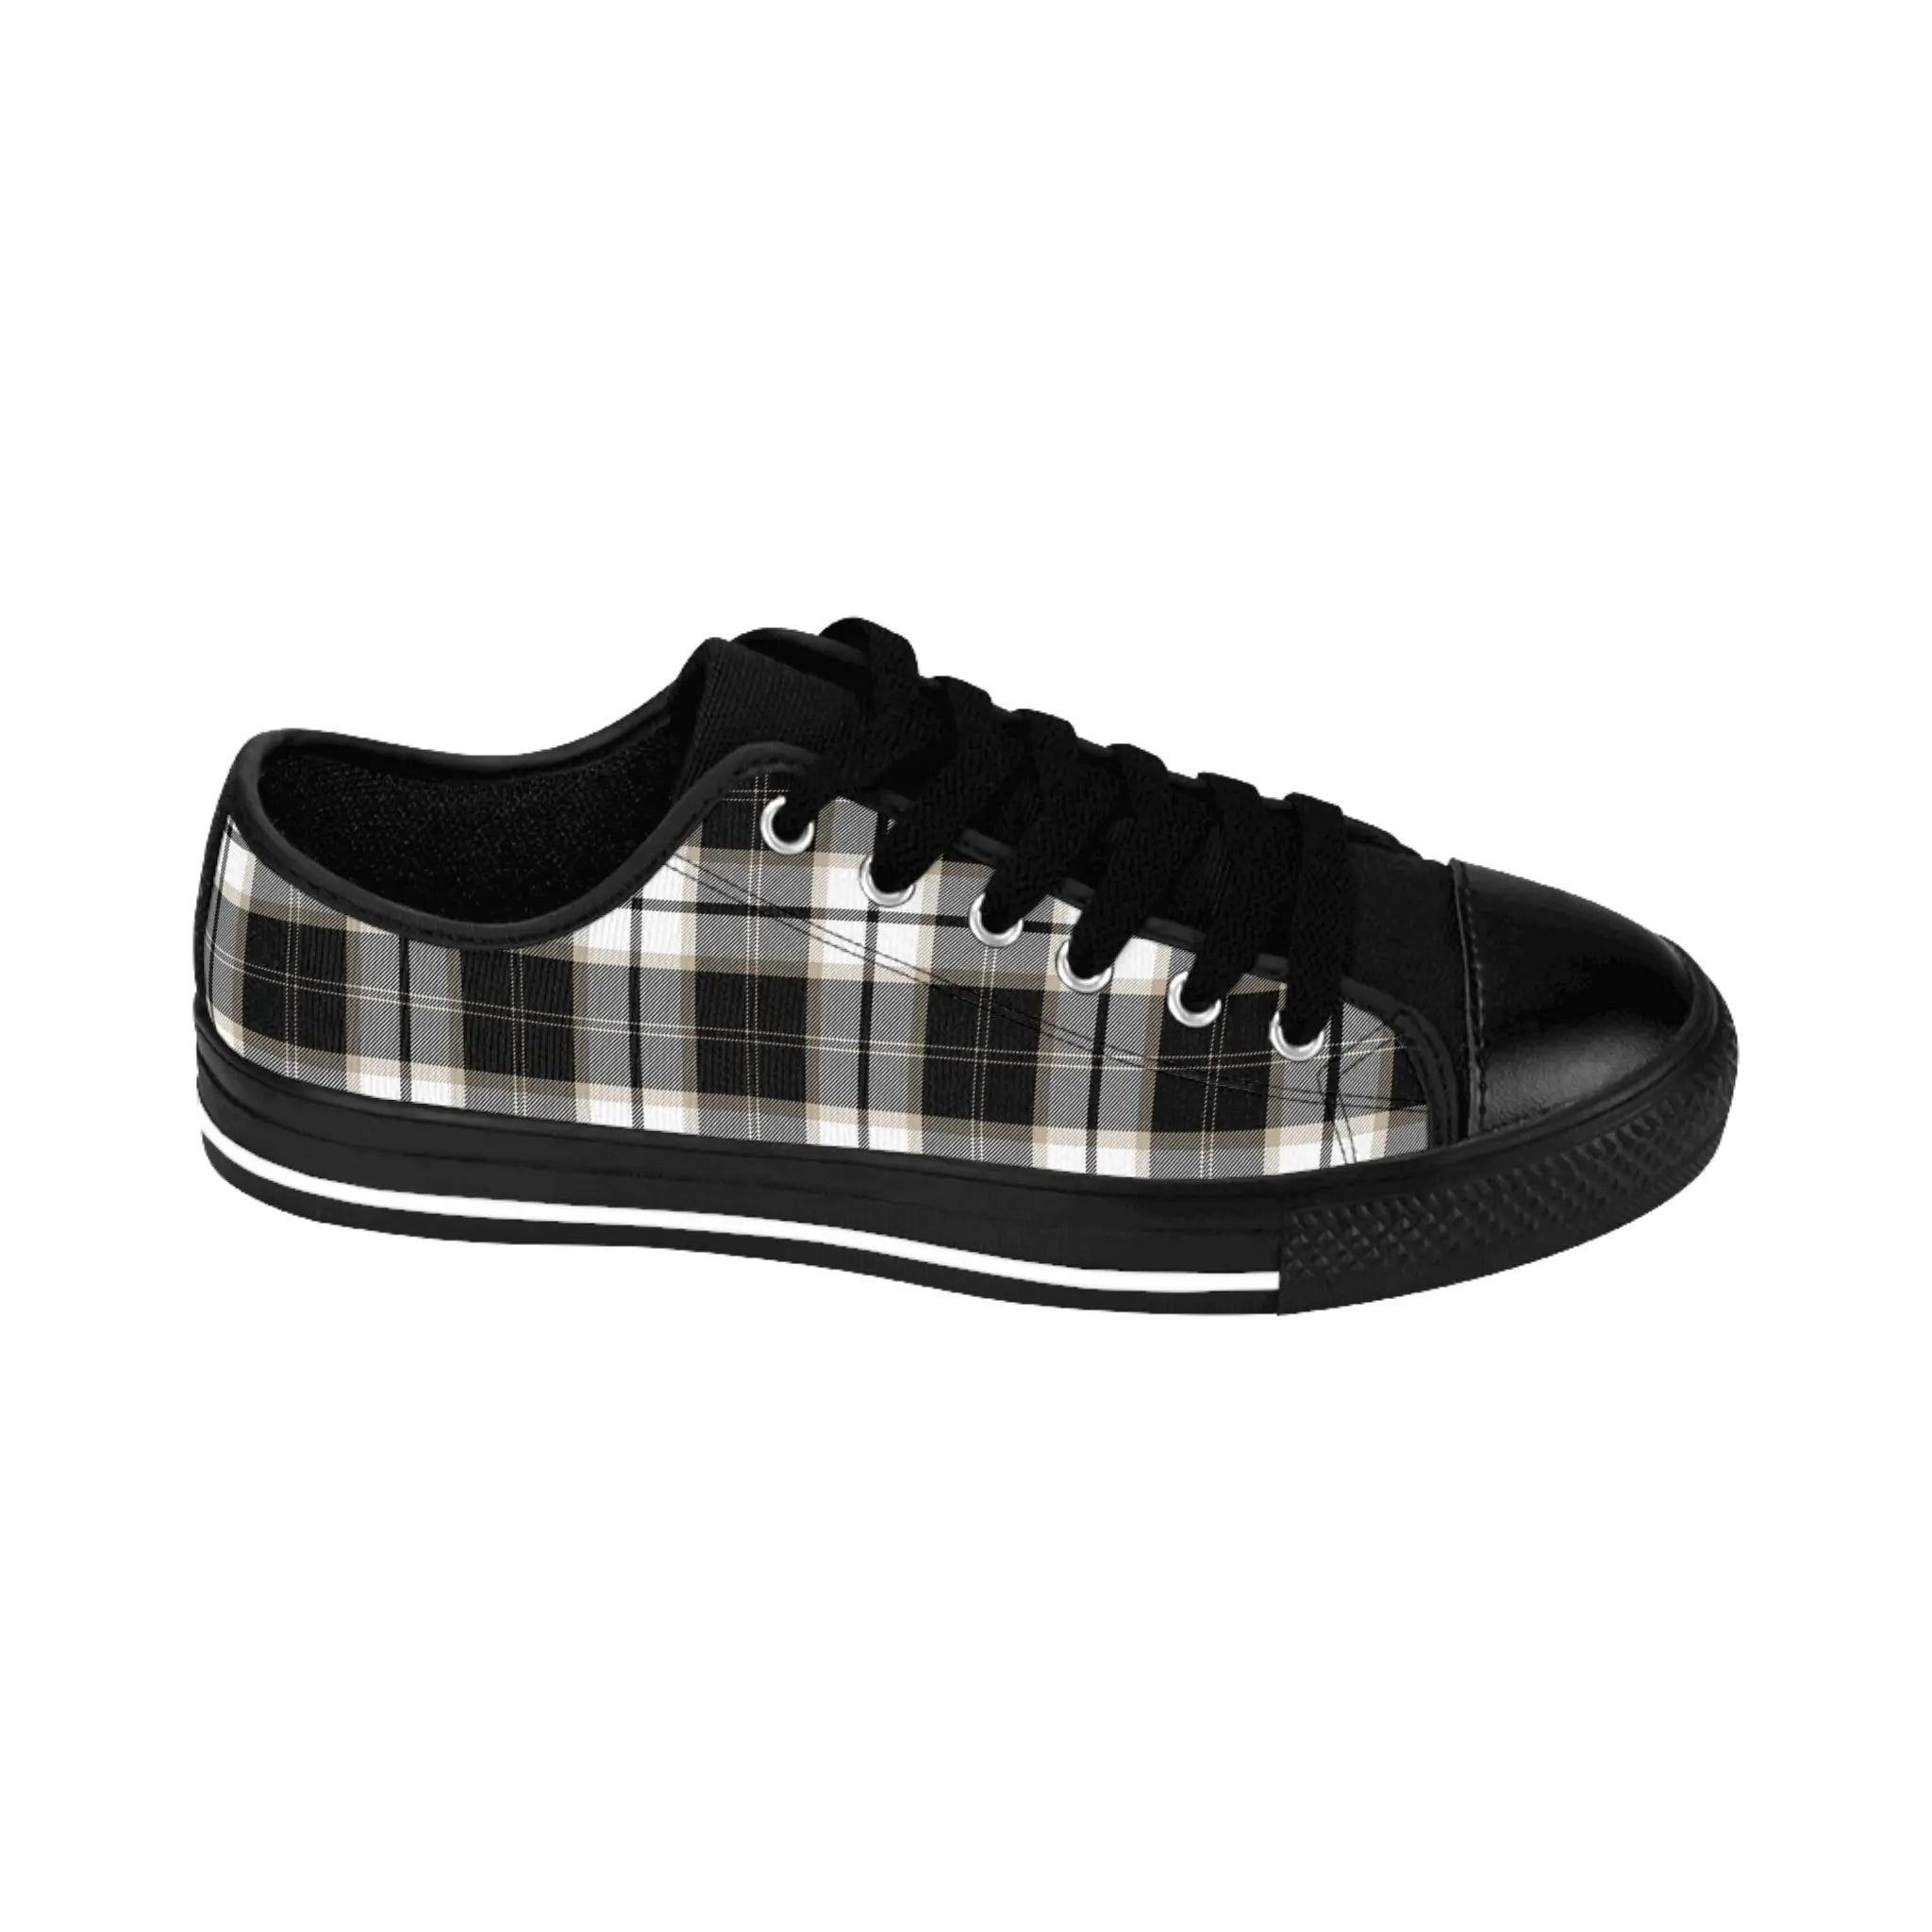  Groove Fashion Collection Black and White Plaid Women's Low Top Canvas Shoes ShoesUS10Blacksole